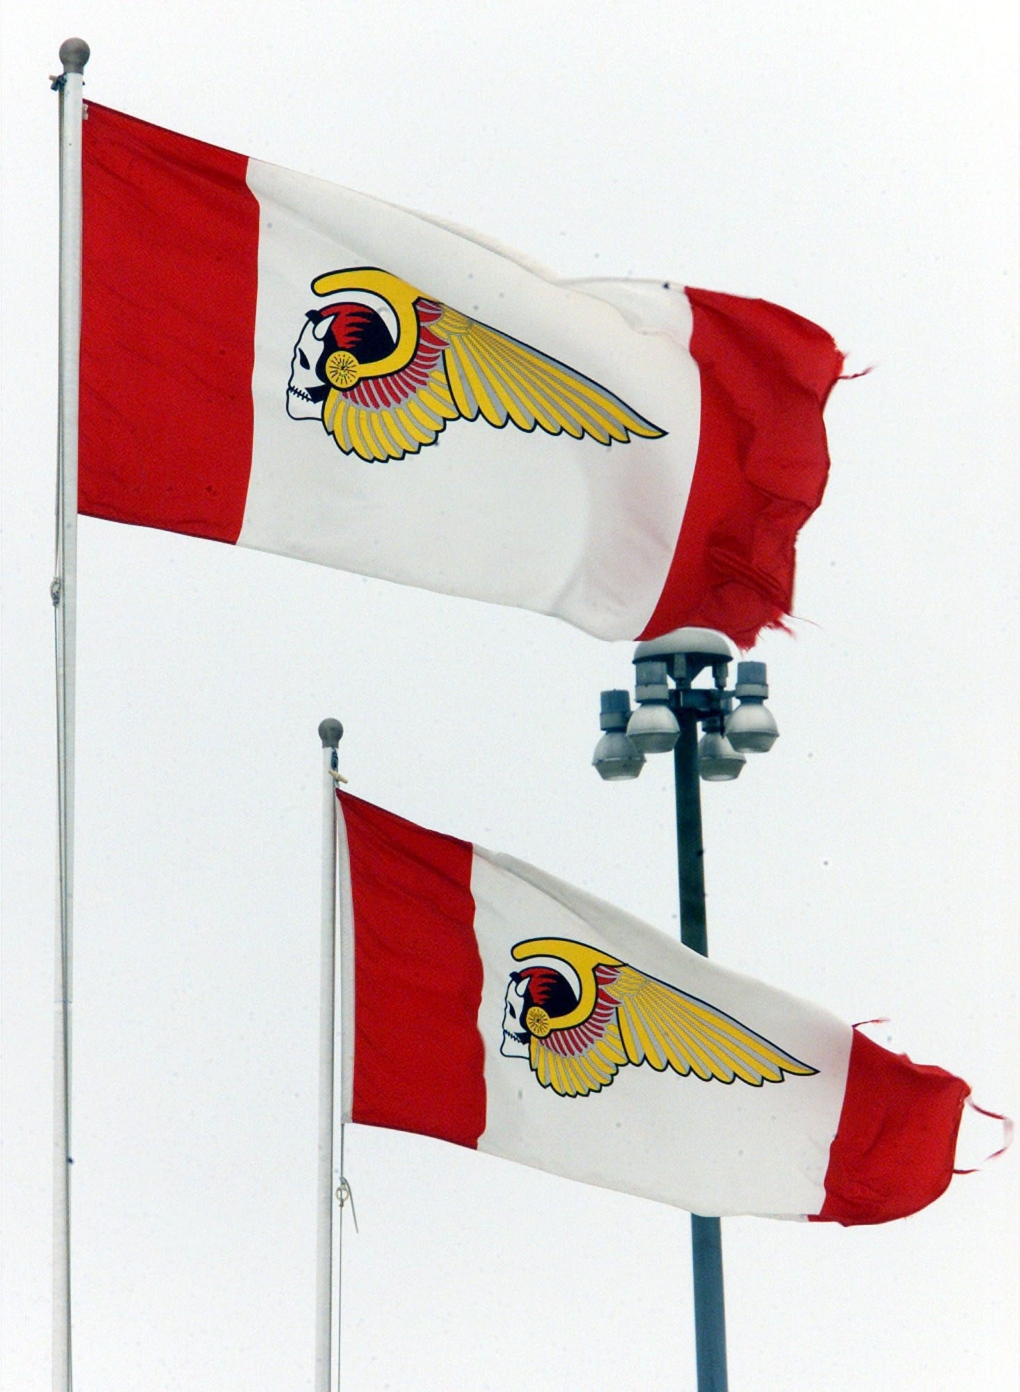 The flags of the Hells Angels biker gang fly over 